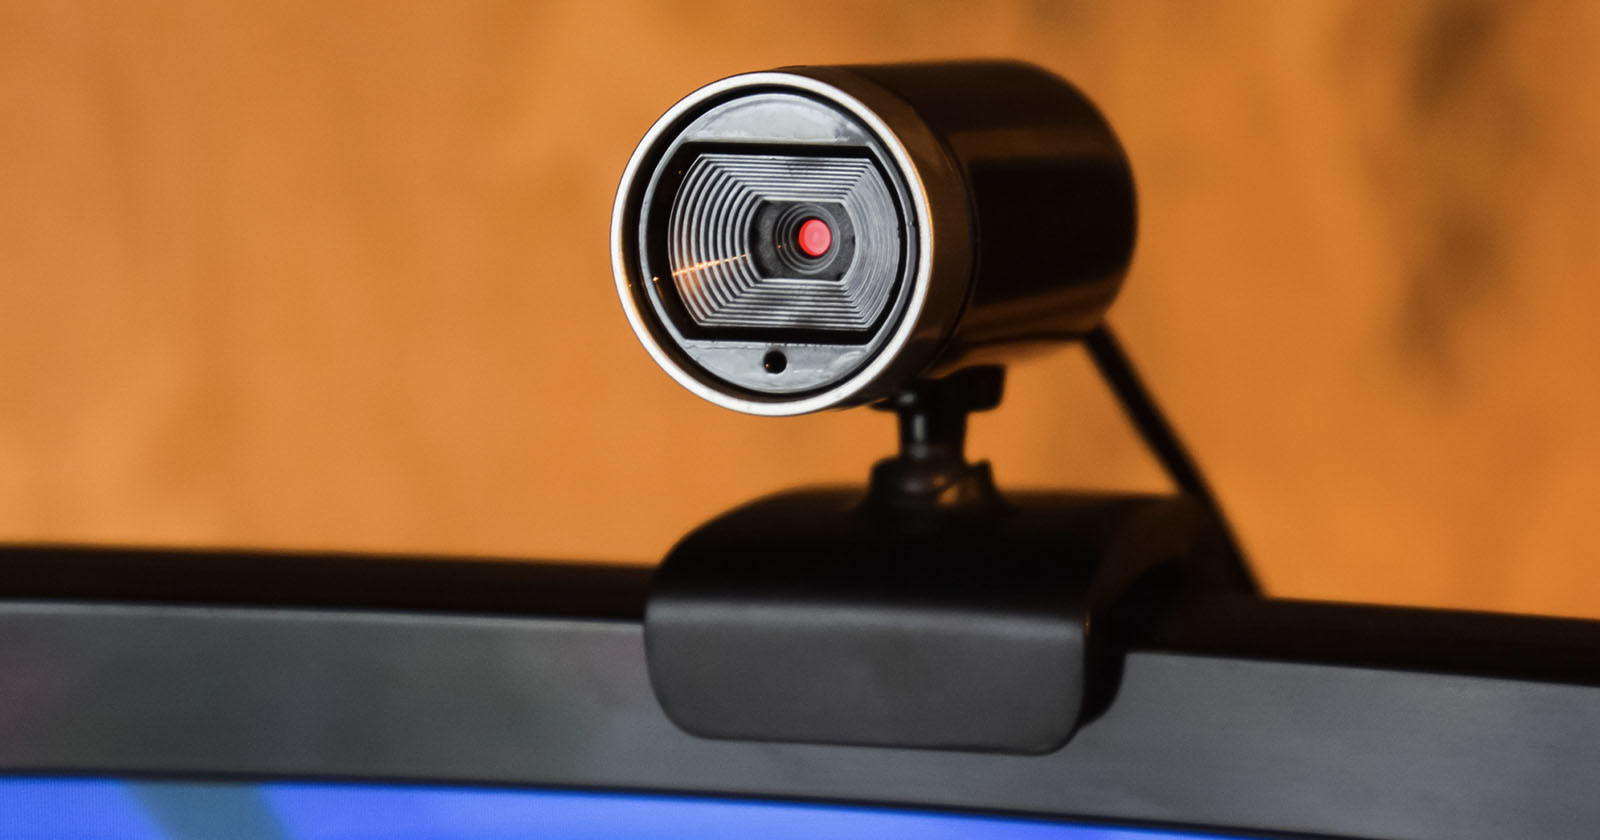 Making Employees Keep A Webcam On While Working is Illegal, Court Rules